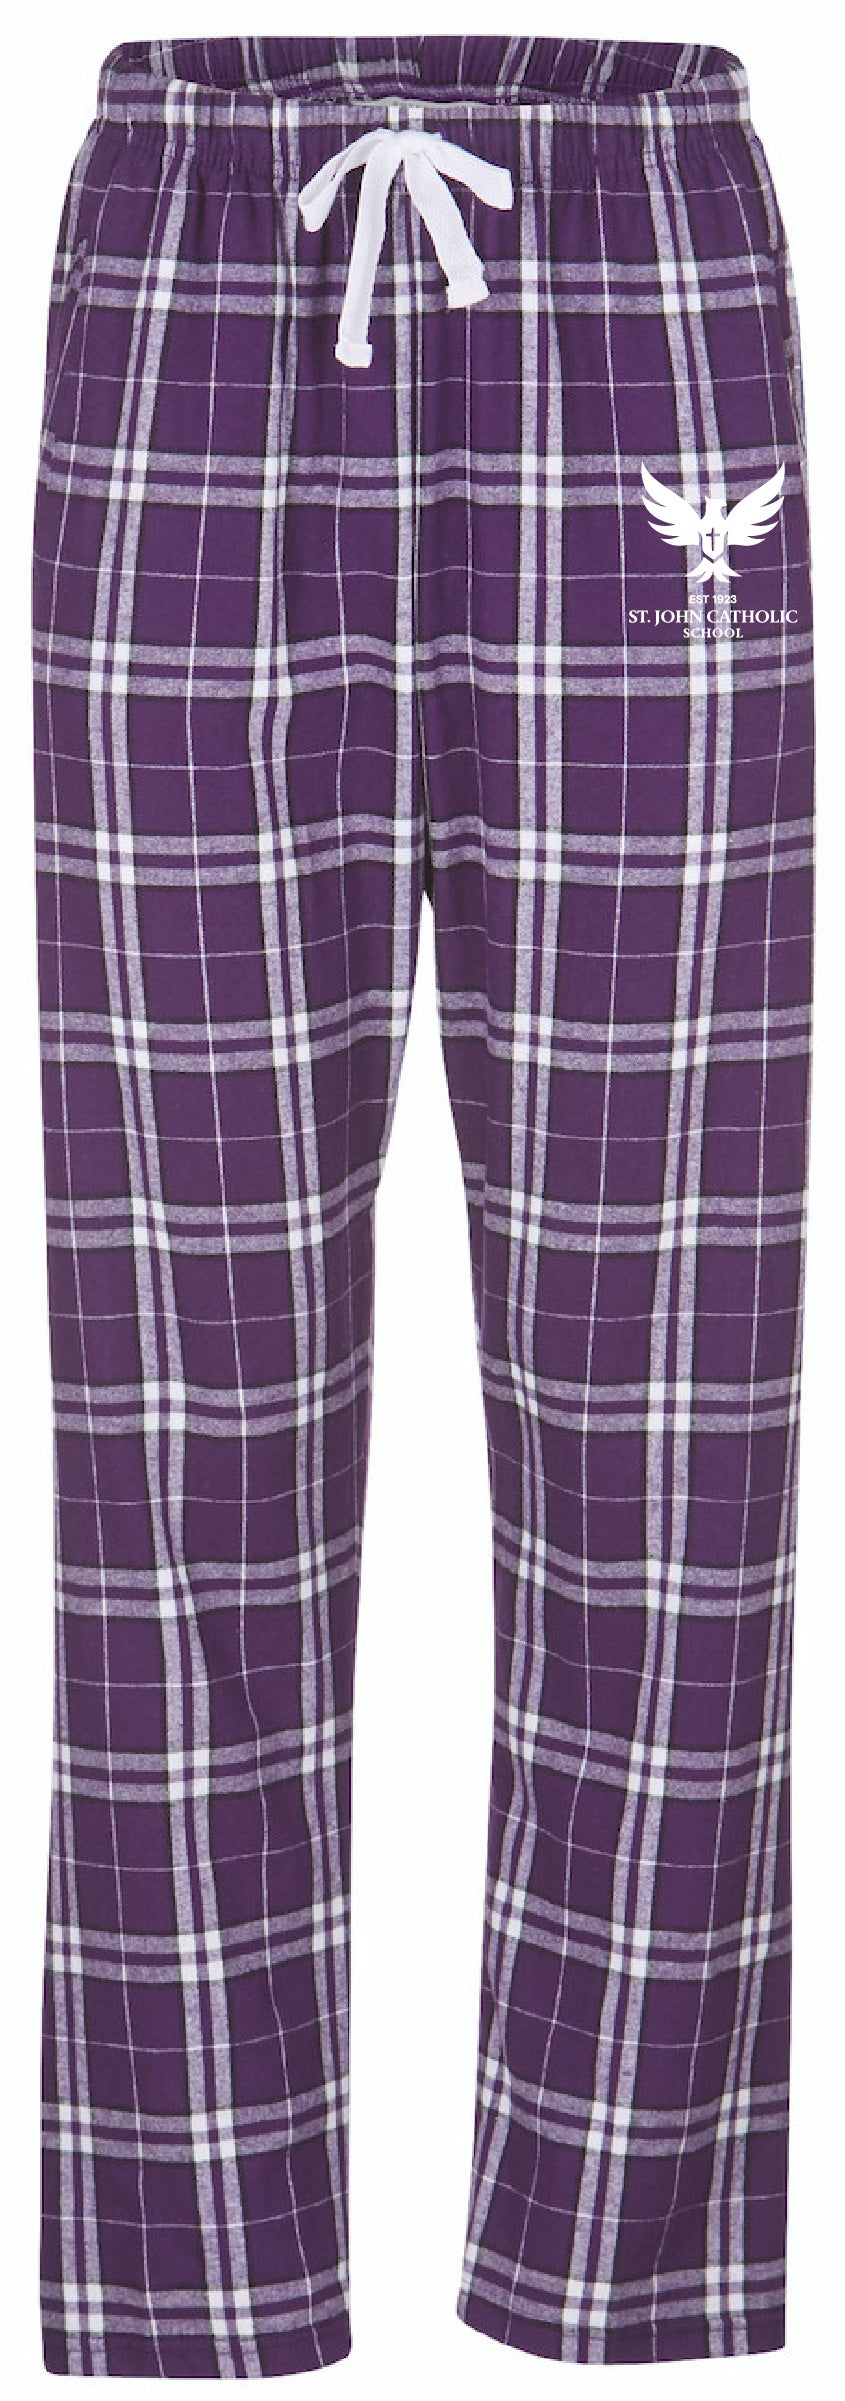 Boxercraft Flannel Purple Pants in mens and womens and YOUTH